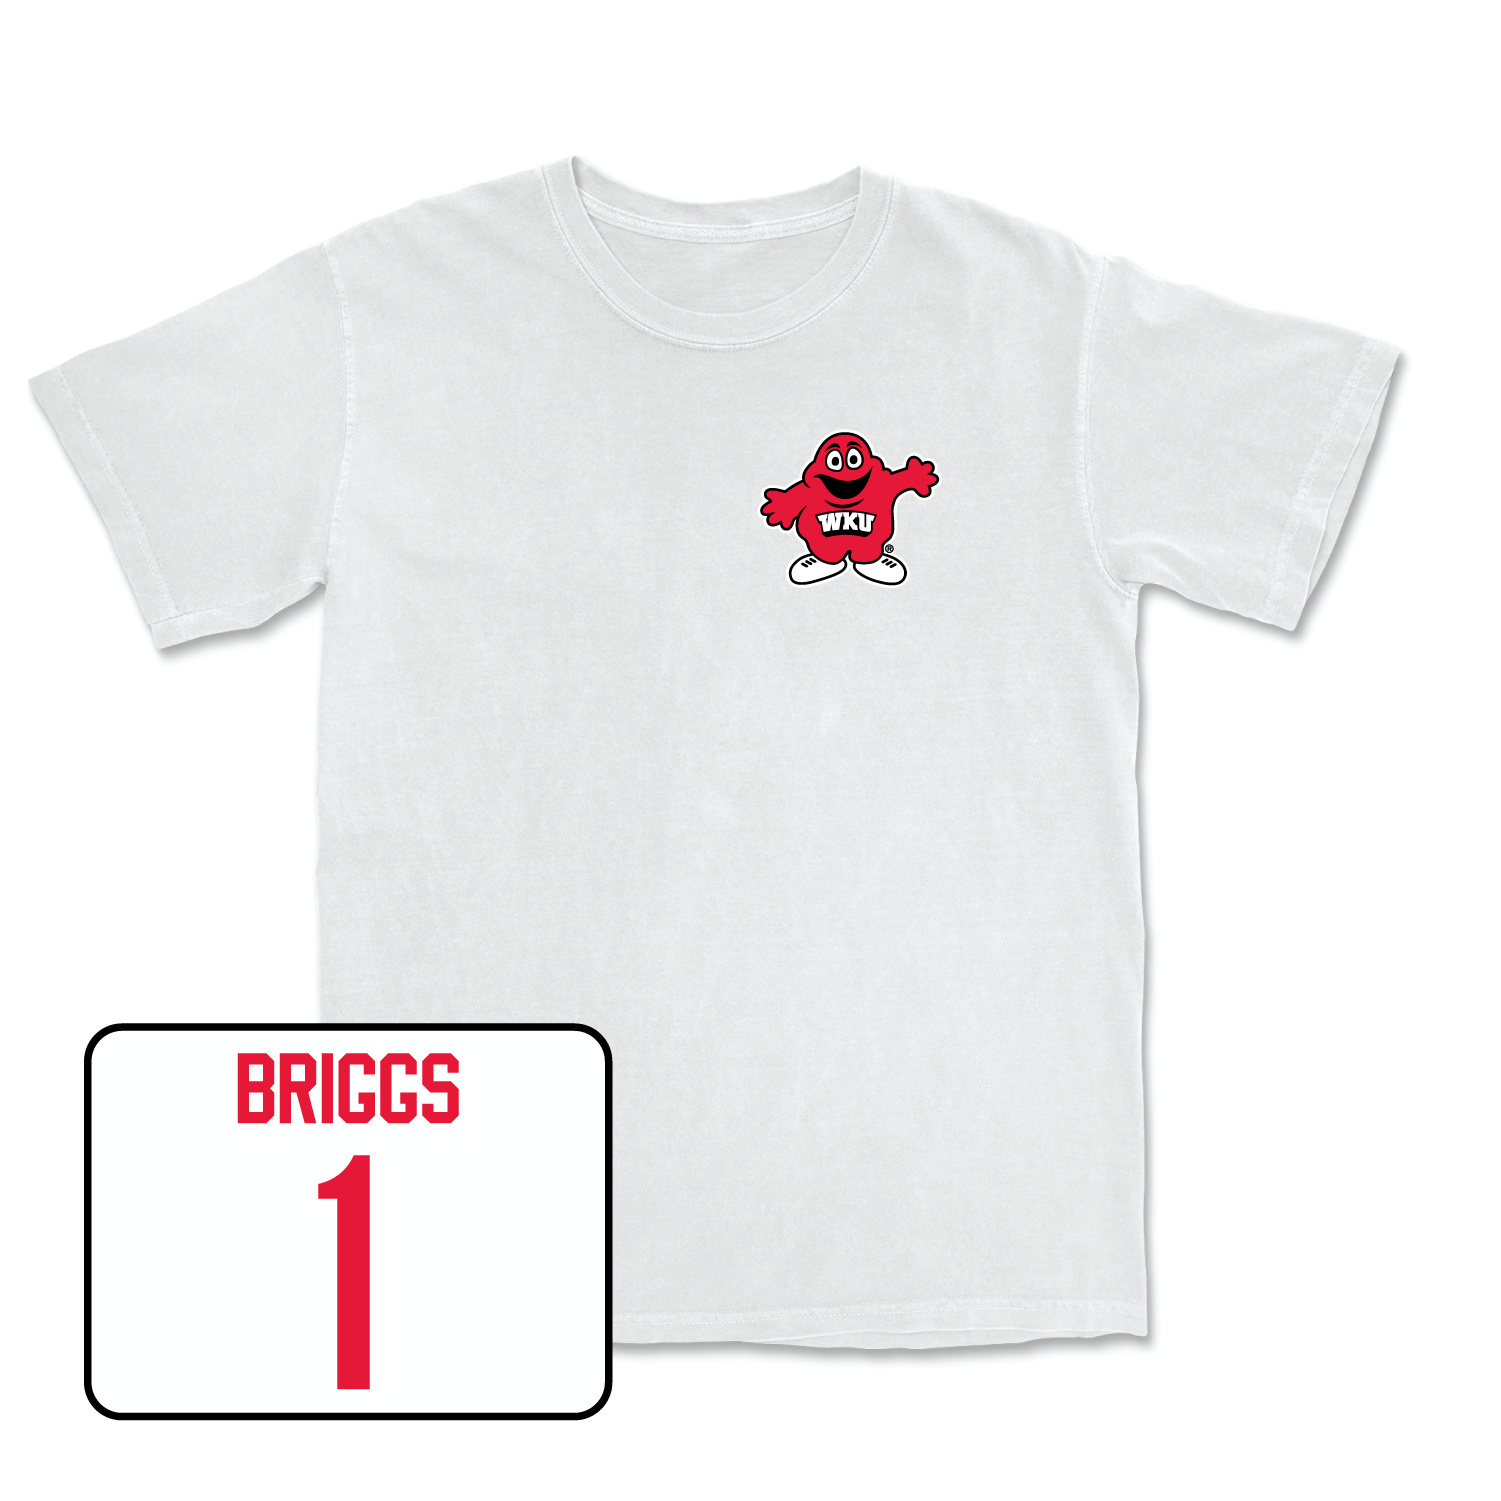 White Women's Volleyball Big Red Comfort Colors Tee Youth Small / Paige Briggs | #1